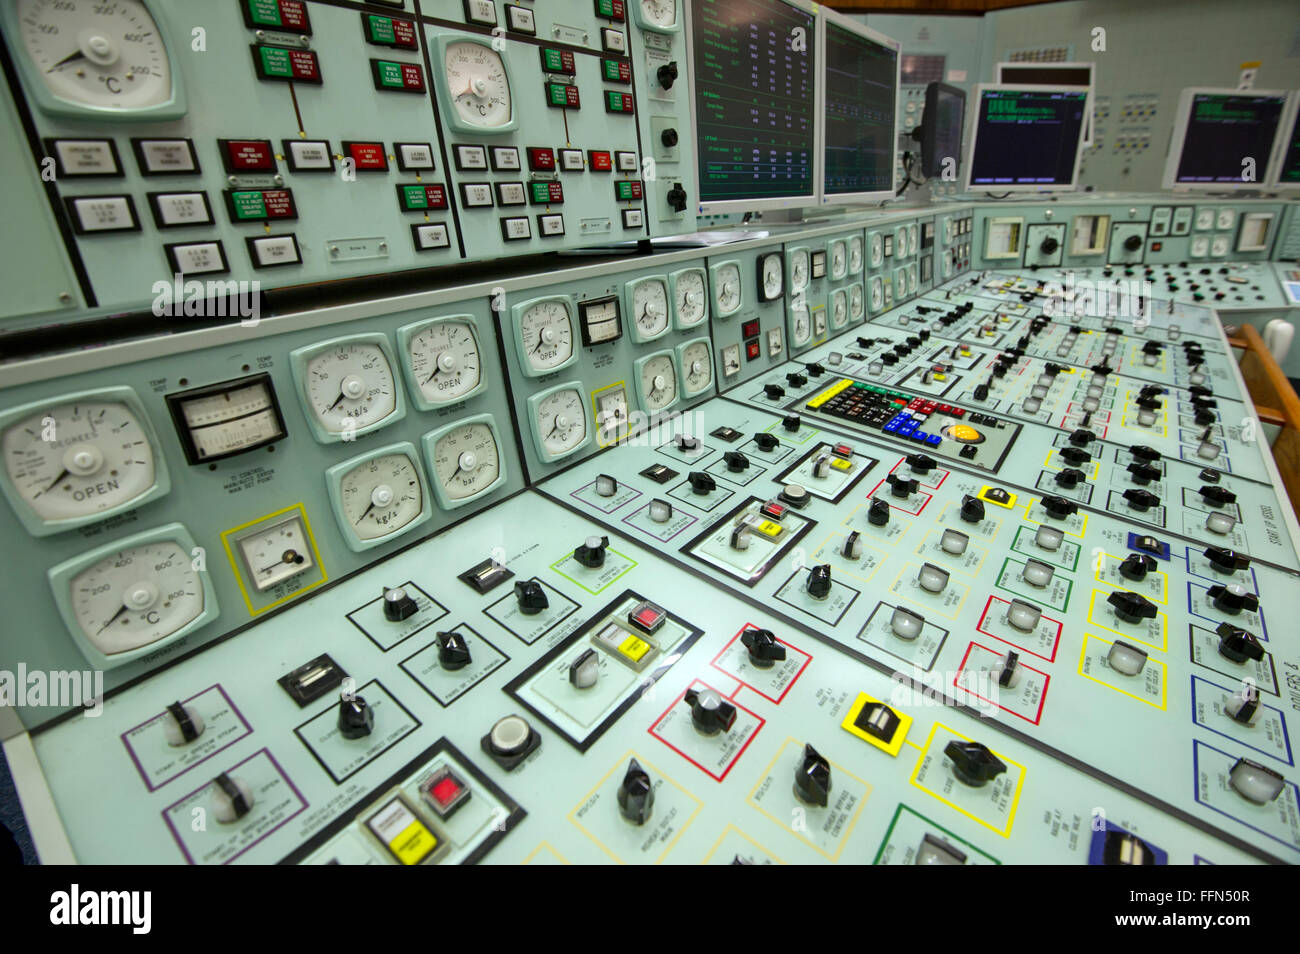 control-room-and-reactor-shut-down-switch-in-hinkley-point-b-nuclear-FFN50R.jpg